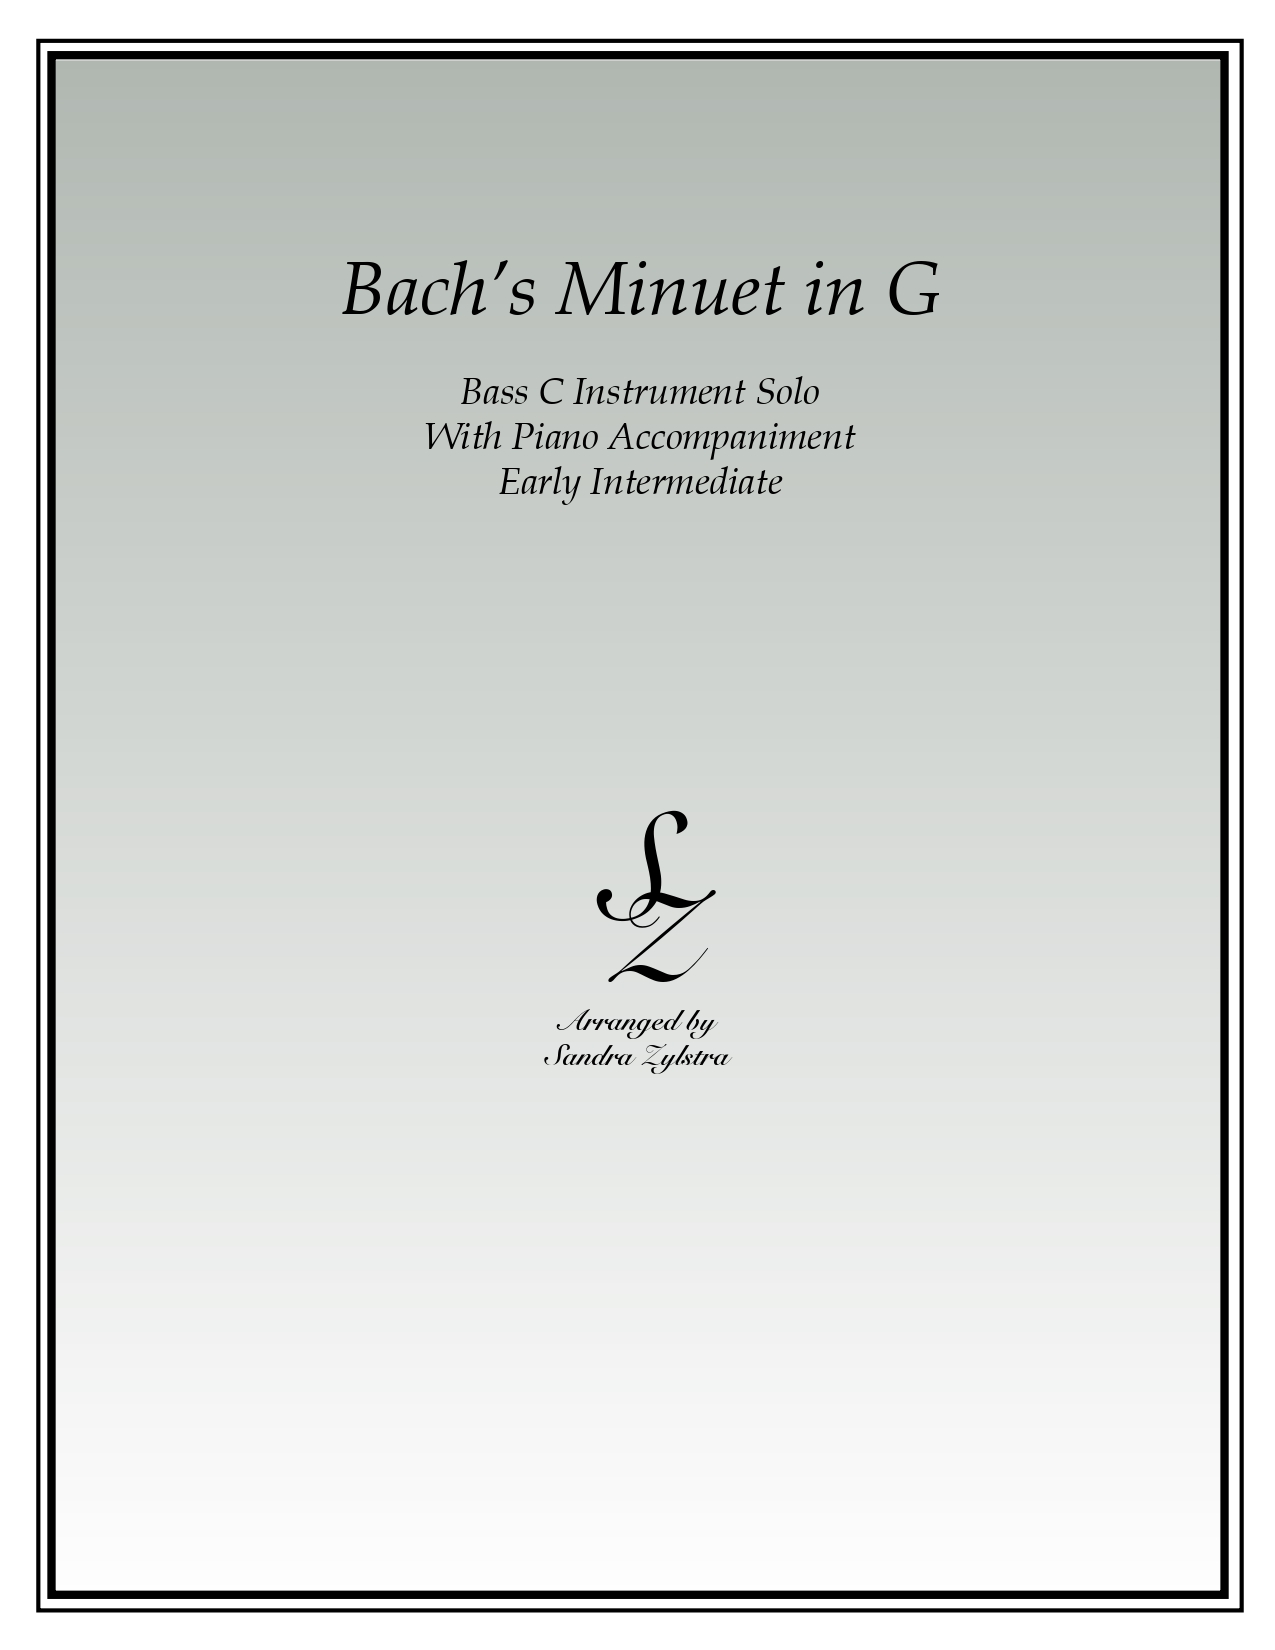 Bachs Minuet In G bass C instrument part cover page 00011